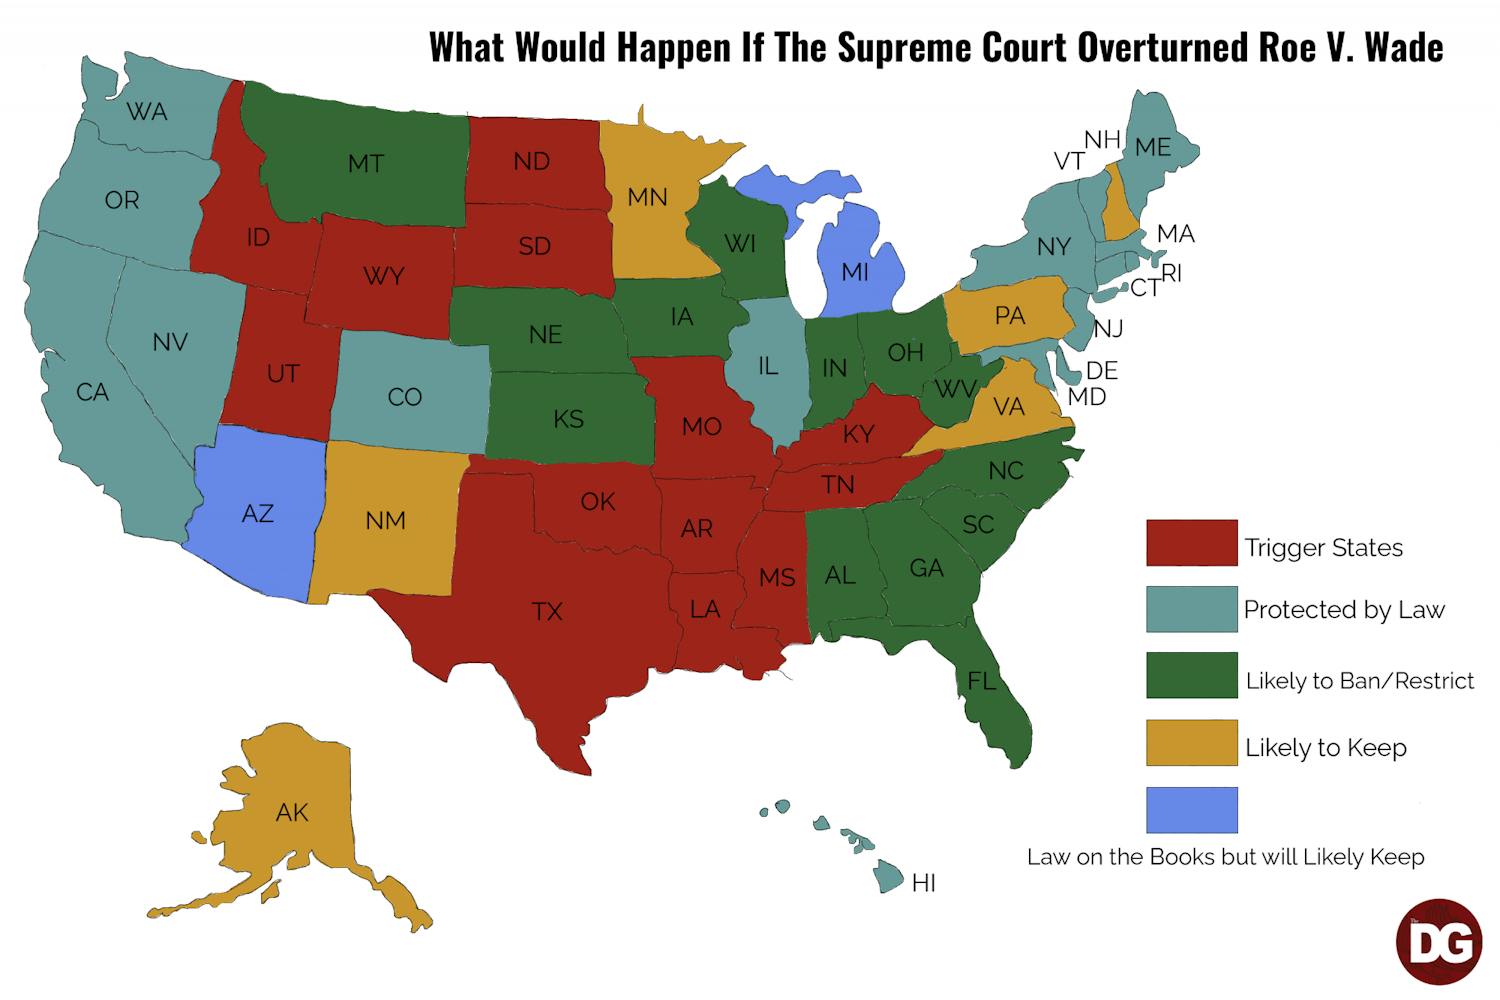 A graphic of the U.S. map that shows what each state is likely to do if Roe v. Wade is overturned.